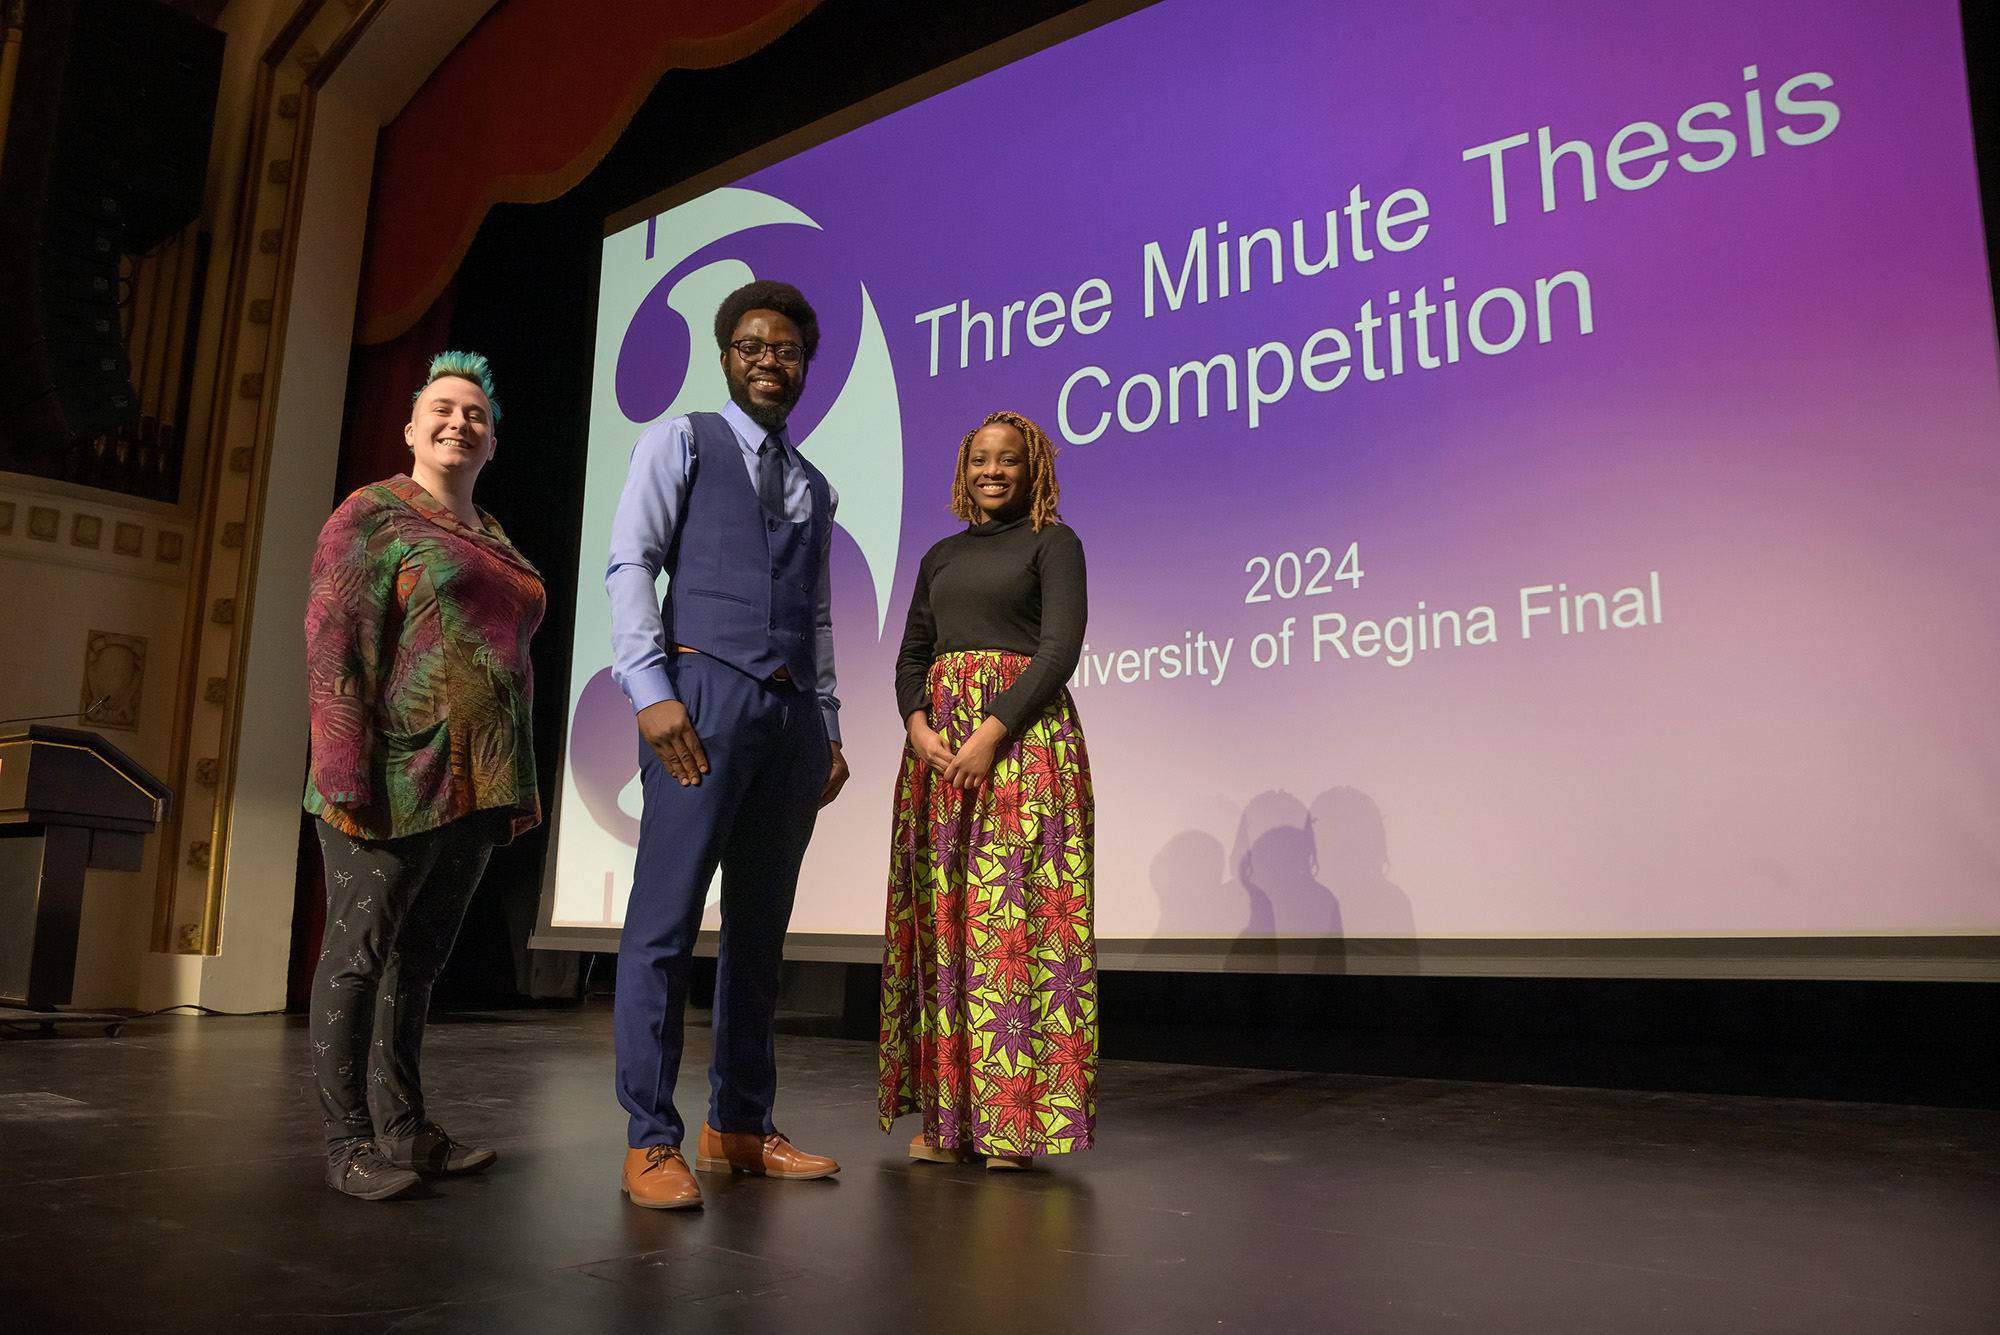 The three winners from the U of R’s 3MT event: (l to r) Breeann Phillips, Michael Mensah, and Max Adjei-Dadson. (Photo by Trevor Hopkin)